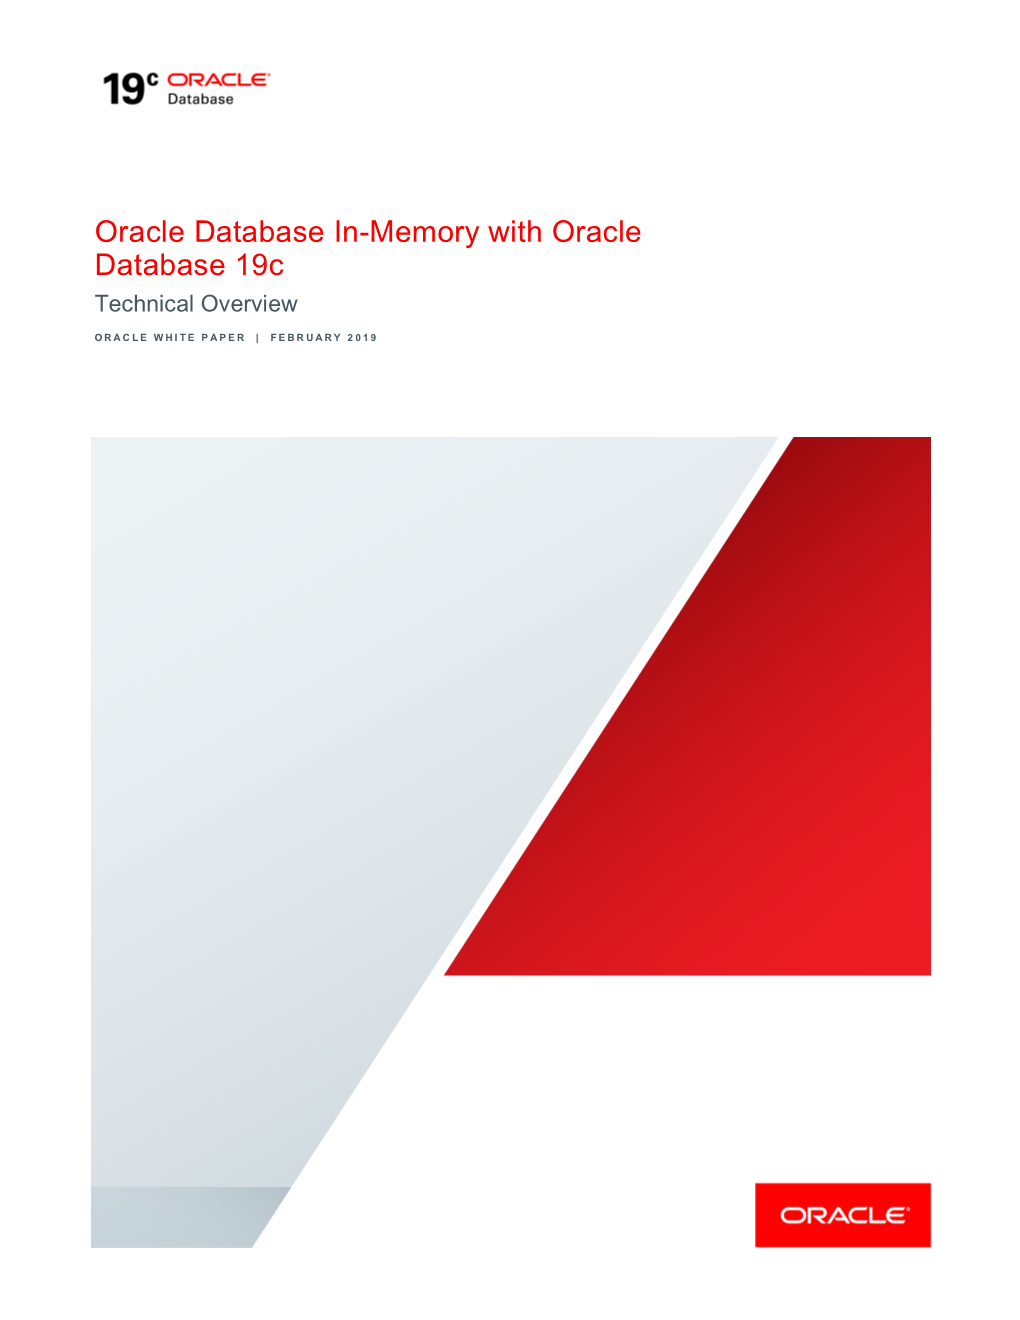 Oracle Database In-Memory with Oracle Database 19C Technical Overview